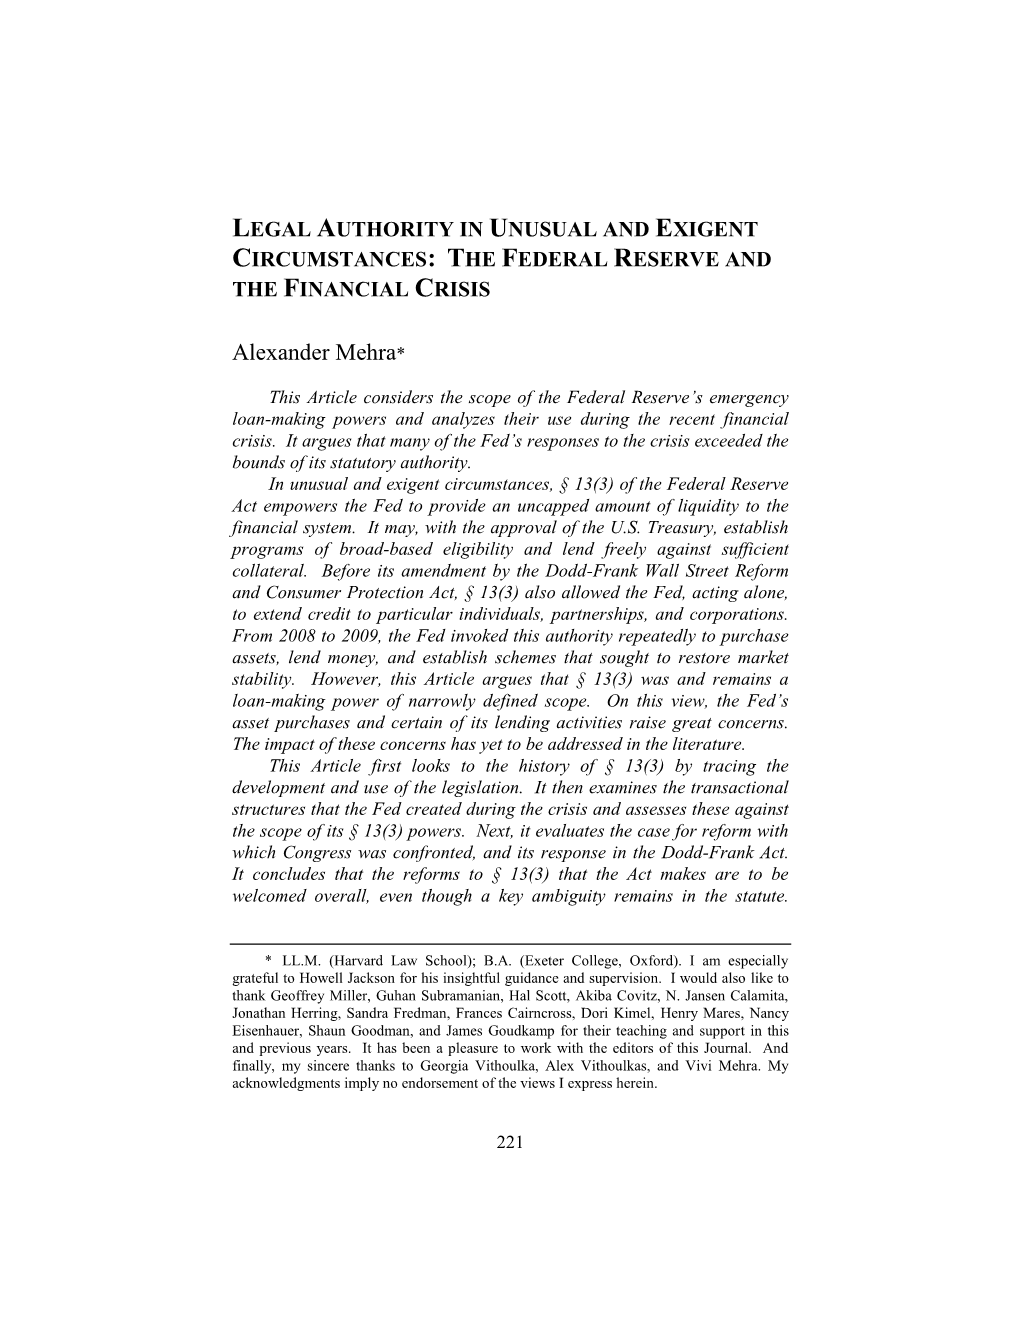 Legal Authority in Unusual and Exigent Circumstances: the Federal Reserve and the Financial Crisis